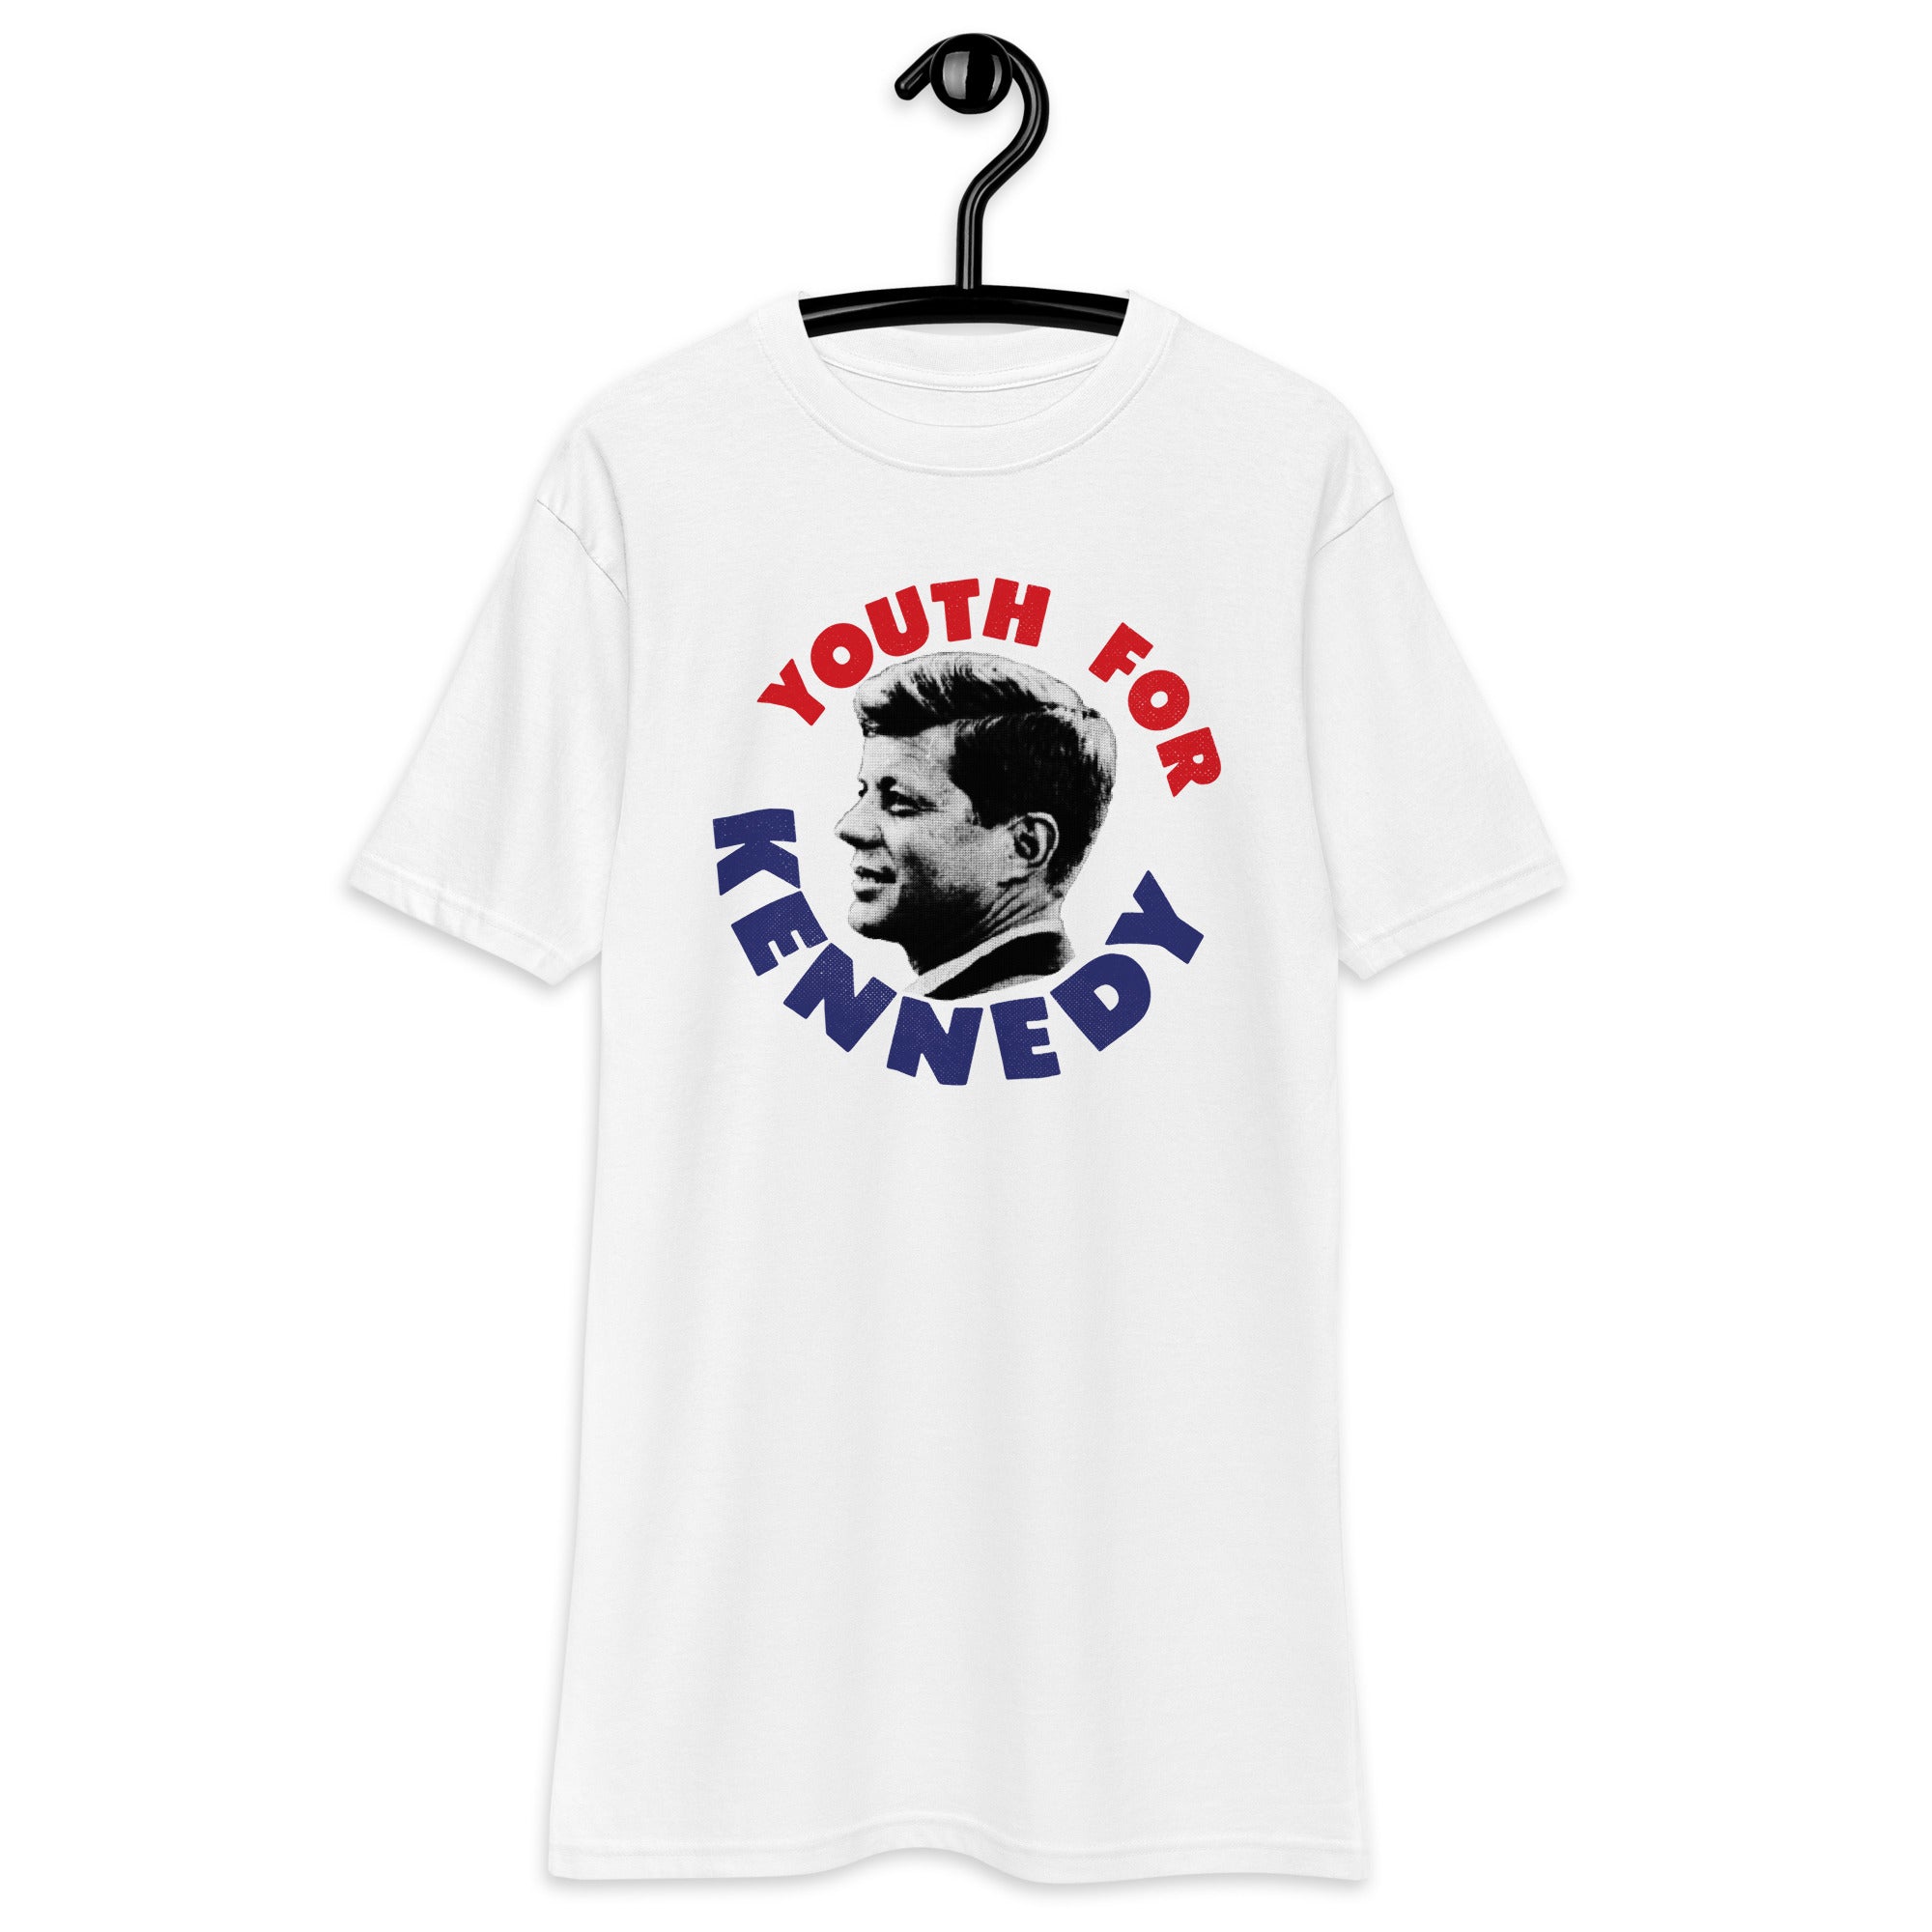 Youth For Kennedy Retro Campaign Heavyweight T-Shirt